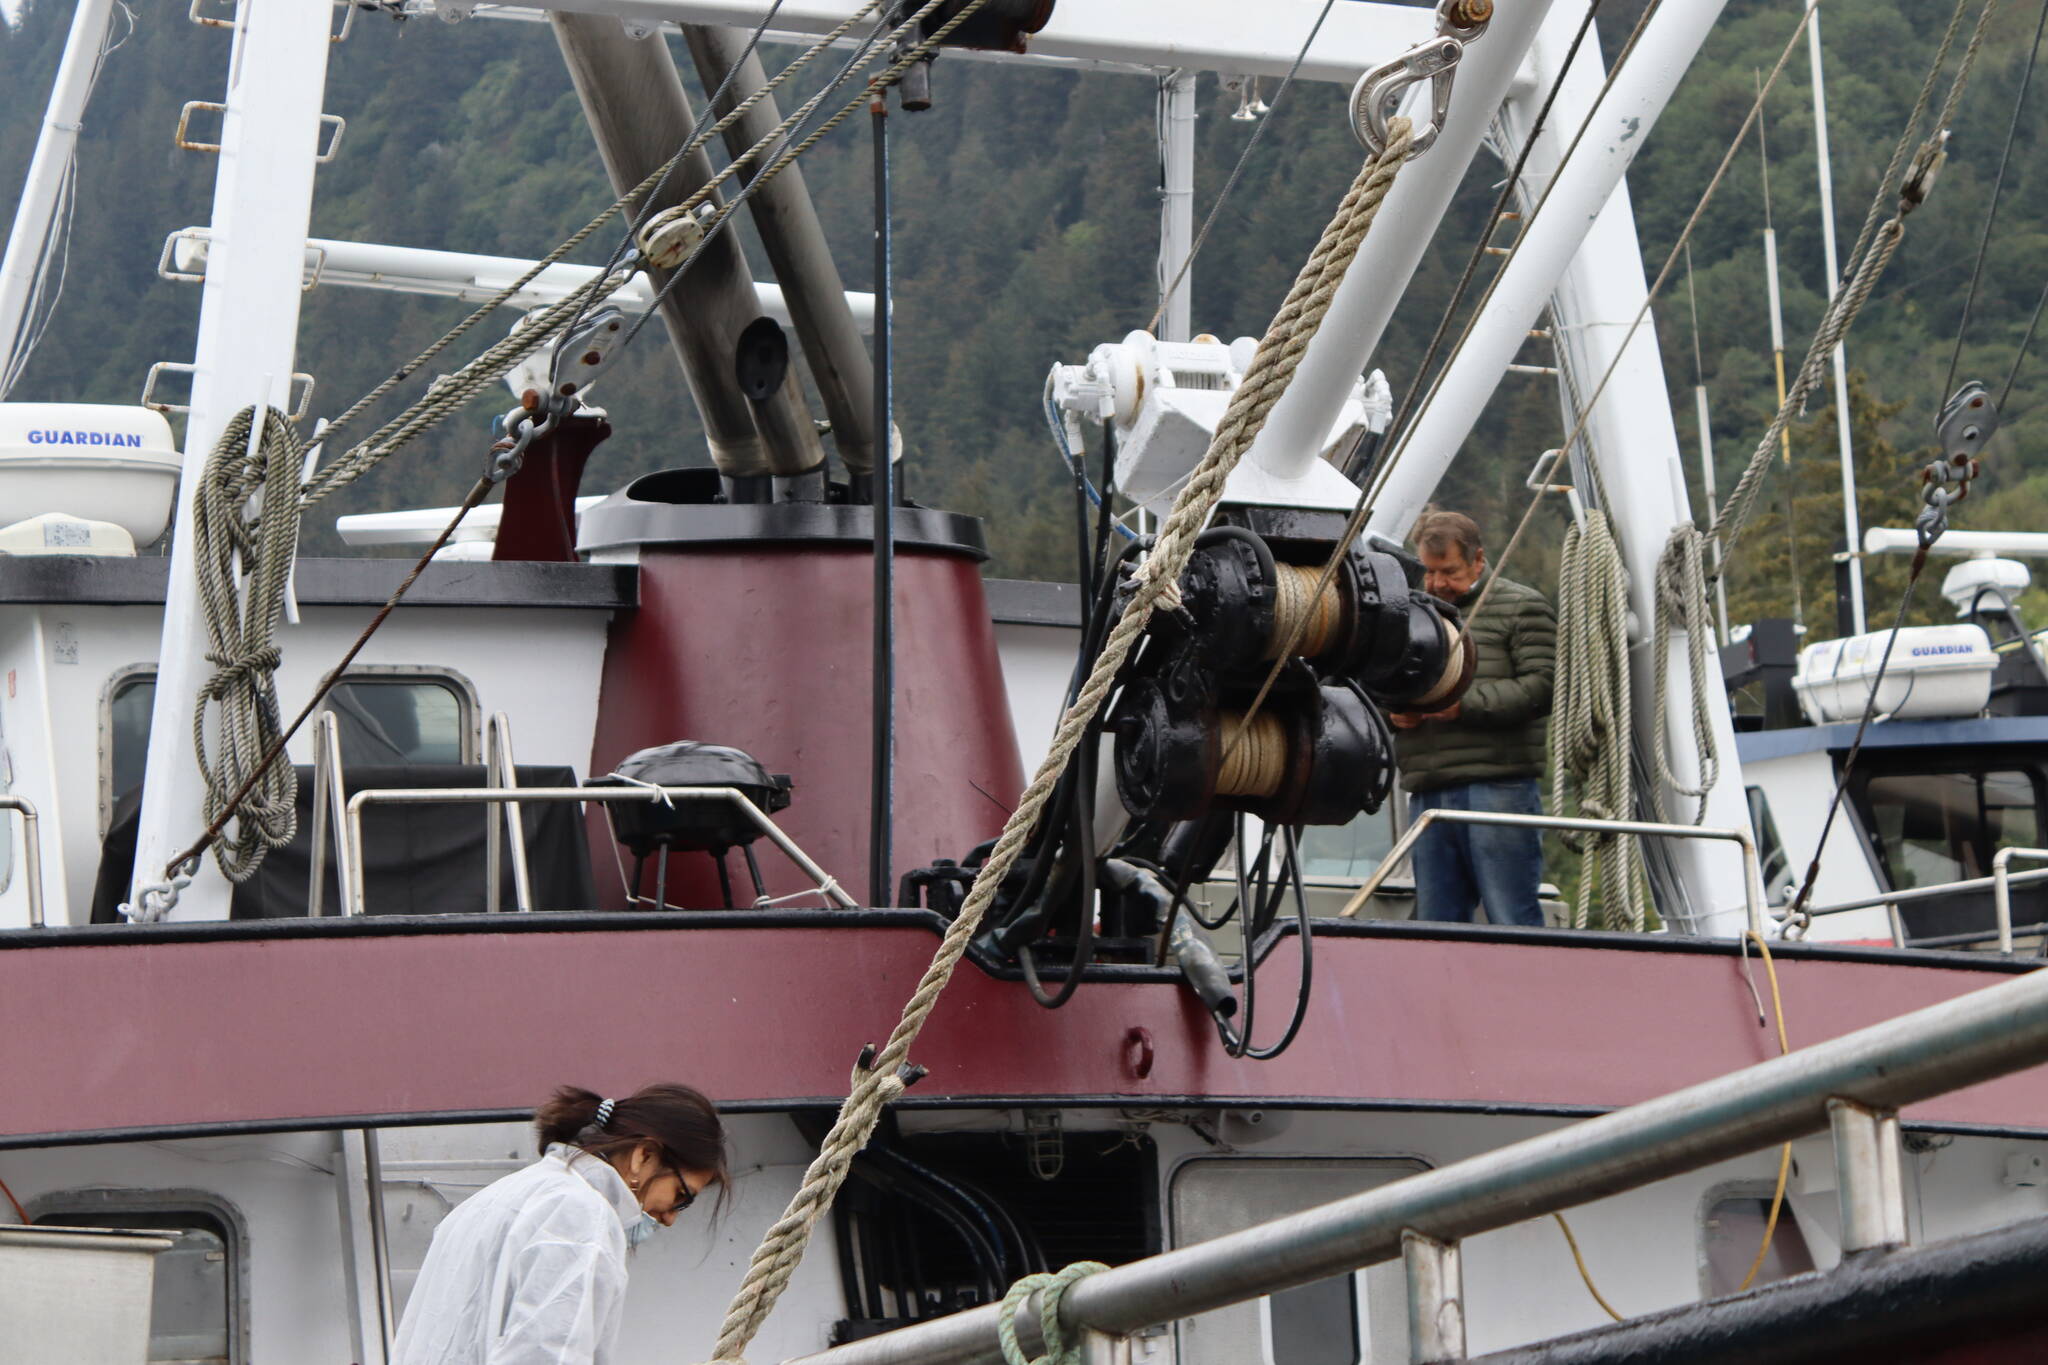 Norval Nelson, owner and operator of Star of the Sea, and his wife, Barbara Cadiente, clean and prep the boat in Aurora Harbor on Wednesday, the same day the Alaska Department of Fish and Game announced commercial crab fisheries would remain closed again this year. (Meredith Jordan/Juneau Empire)